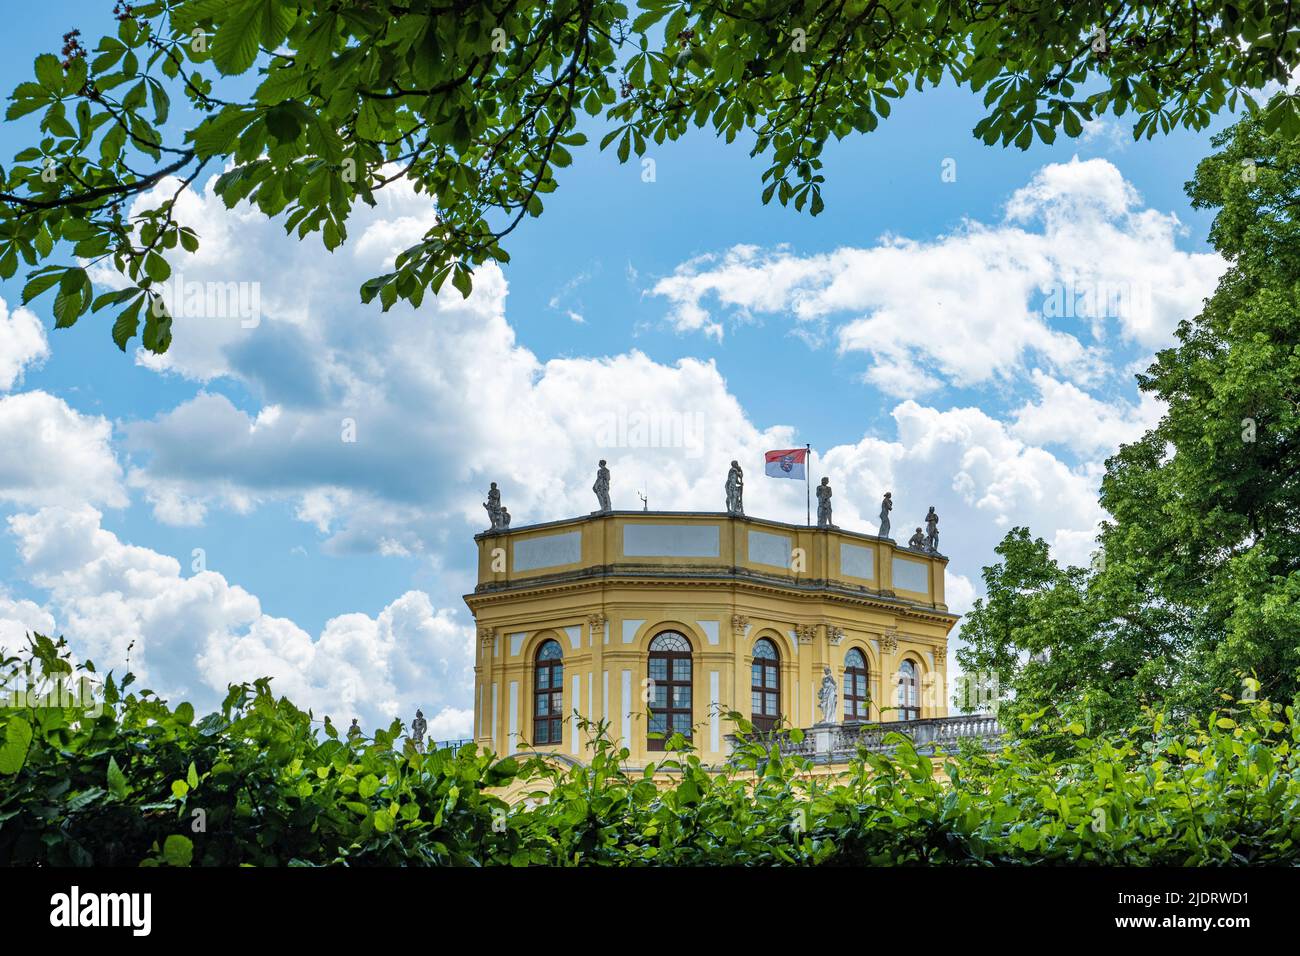 Part of the baroque orangery in Kassel, framed with green hedge and branches Stock Photo